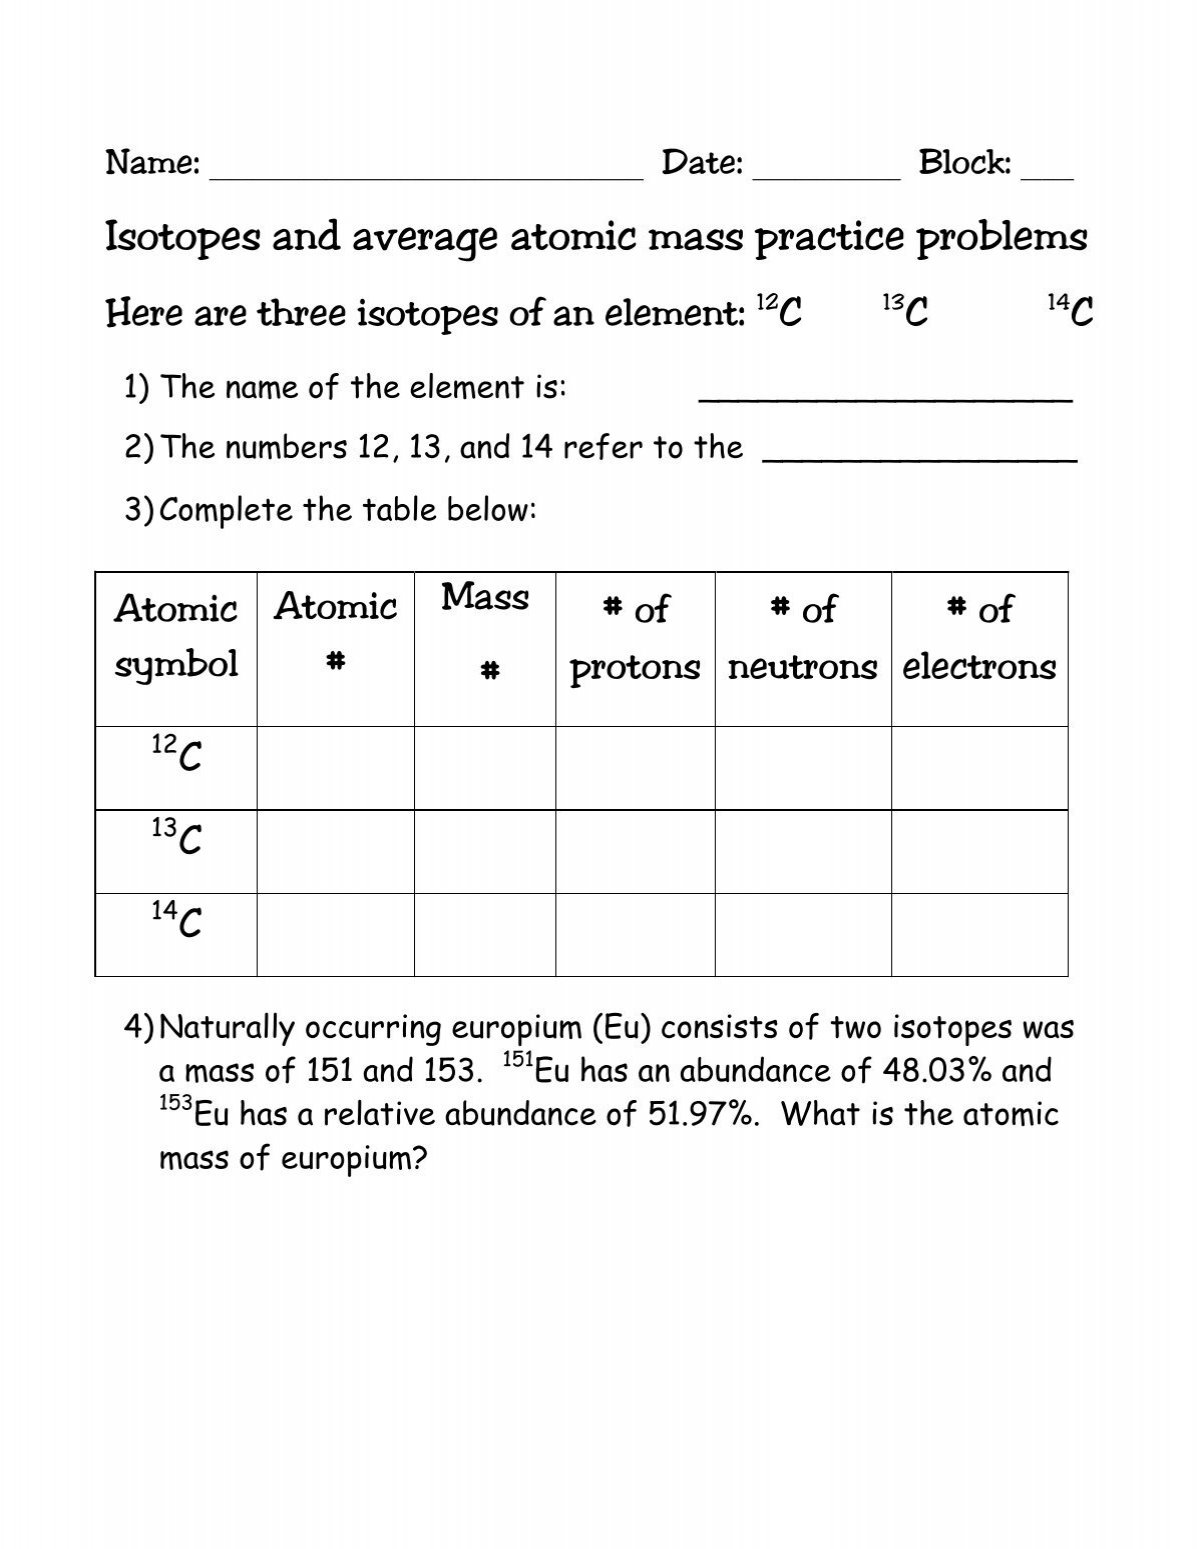 isotopes-and-average-atomic-mass-practice-problems-of-of-of